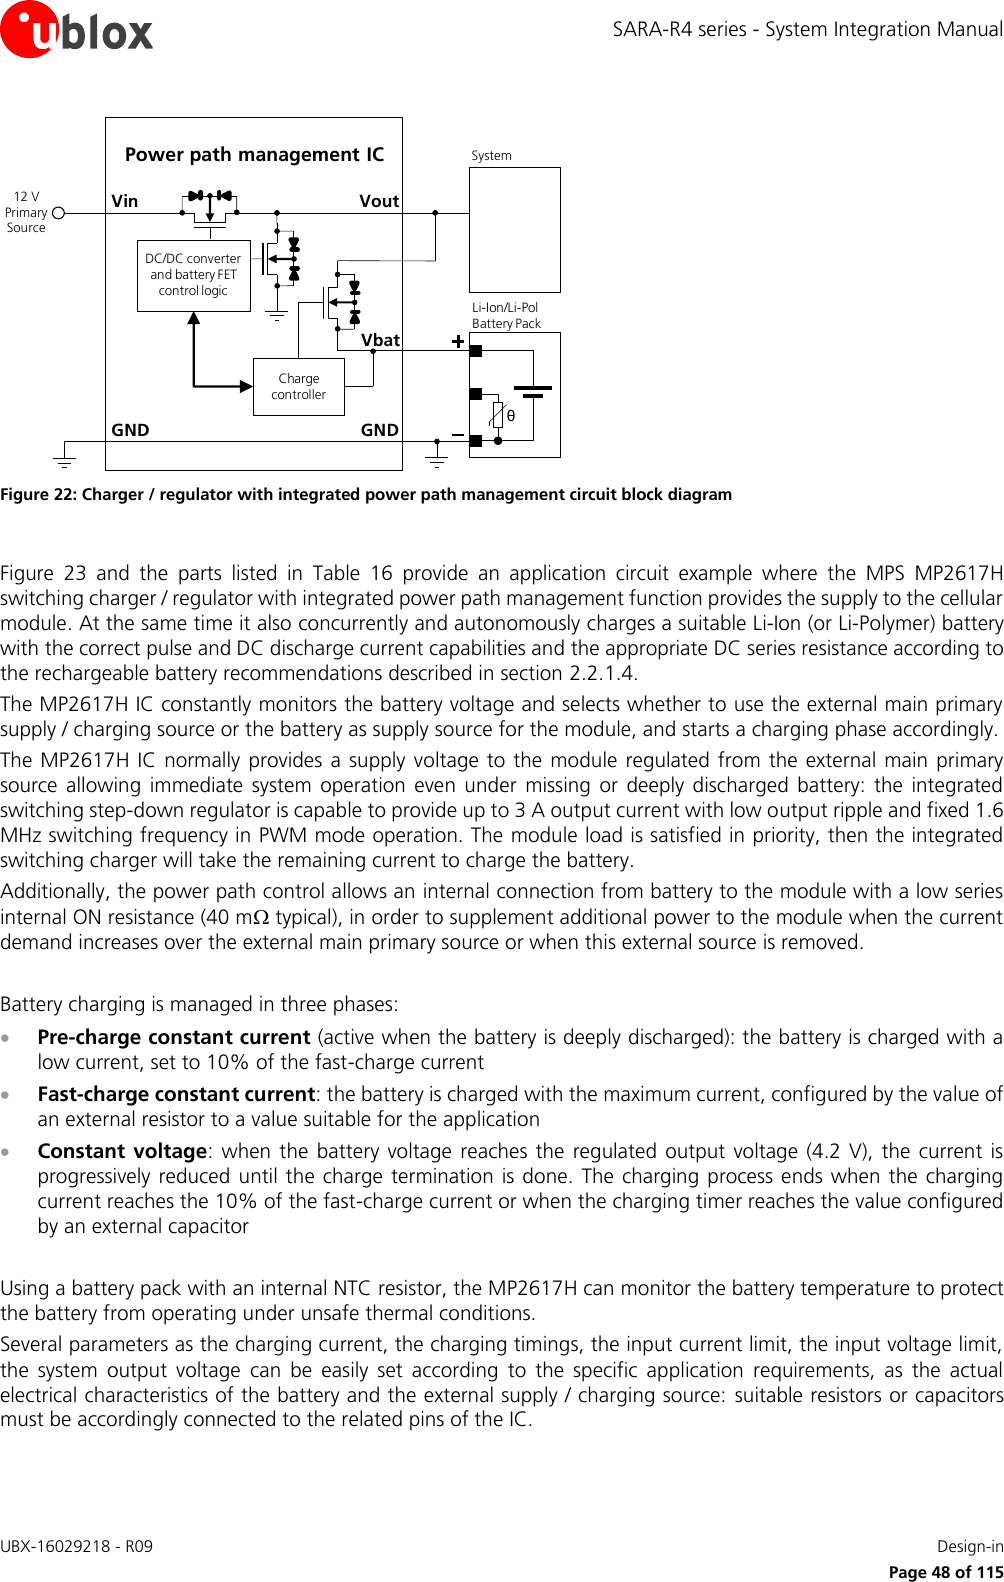 SARA-R4 series - System Integration Manual UBX-16029218 - R09    Design-in     Page 48 of 115 GNDPower path management ICVoutVinθLi-Ion/Li-Pol Battery PackGNDSystem12 V Primary SourceCharge controllerDC/DC converter and battery FET control logicVbat Figure 22: Charger / regulator with integrated power path management circuit block diagram  Figure  23  and  the  parts  listed  in  Table  16  provide  an  application  circuit  example  where  the  MPS  MP2617H switching charger / regulator with integrated power path management function provides the supply to the cellular module. At the same time it also concurrently and autonomously charges a suitable Li-Ion (or Li-Polymer) battery with the correct pulse and DC discharge current capabilities and the appropriate DC series resistance according to the rechargeable battery recommendations described in section 2.2.1.4. The MP2617H IC constantly monitors the battery voltage and selects whether to use the external main primary supply / charging source or the battery as supply source for the module, and starts a charging phase accordingly.  The MP2617H IC  normally  provides a supply  voltage to the module regulated from the external main primary source  allowing  immediate  system  operation  even under  missing  or  deeply  discharged  battery: the  integrated switching step-down regulator is capable to provide up to 3 A output current with low output ripple and fixed 1.6 MHz switching frequency in PWM mode operation. The module load is satisfied in priority, then the integrated switching charger will take the remaining current to charge the battery. Additionally, the power path control allows an internal connection from battery to the module with a low series internal ON resistance (40 m typical), in order to supplement additional power to the module when the current demand increases over the external main primary source or when this external source is removed.  Battery charging is managed in three phases:  Pre-charge constant current (active when the battery is deeply discharged): the battery is charged with a low current, set to 10% of the fast-charge current  Fast-charge constant current: the battery is charged with the maximum current, configured by the value of an external resistor to a value suitable for the application  Constant voltage:  when the  battery voltage reaches the  regulated  output  voltage (4.2 V),  the  current is progressively reduced  until the  charge  termination  is done.  The  charging  process ends when the  charging current reaches the 10% of the fast-charge current or when the charging timer reaches the value configured by an external capacitor  Using a battery pack with an internal NTC resistor, the MP2617H can monitor the battery temperature to protect the battery from operating under unsafe thermal conditions. Several parameters as the charging current, the charging timings, the input current limit, the input voltage limit, the  system  output  voltage  can  be  easily  set  according  to  the  specific  application  requirements,  as  the  actual electrical characteristics of the battery and the external supply / charging source:  suitable resistors or capacitors must be accordingly connected to the related pins of the IC.  